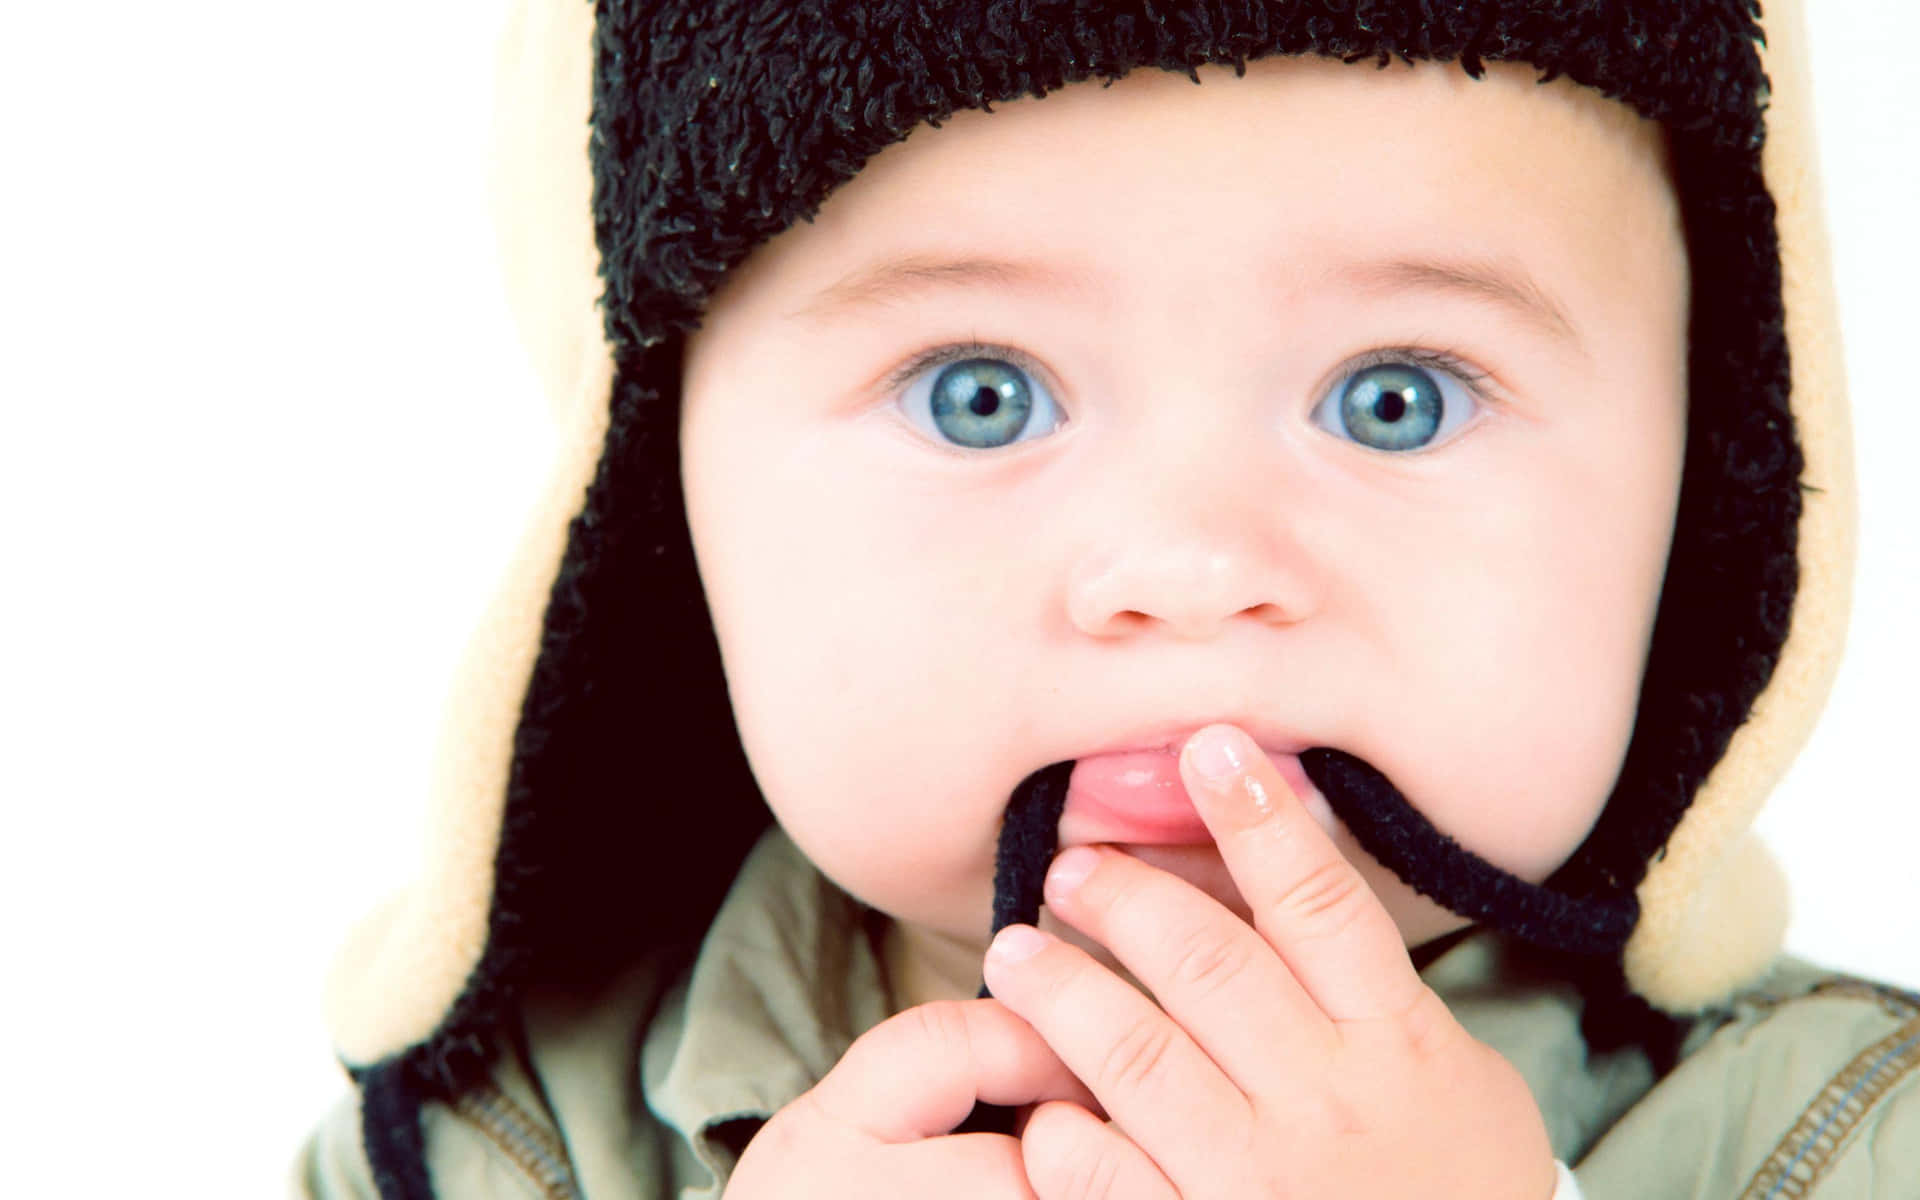 "innocence And Wonder: Close-up Portrait Of A Cute Baby"